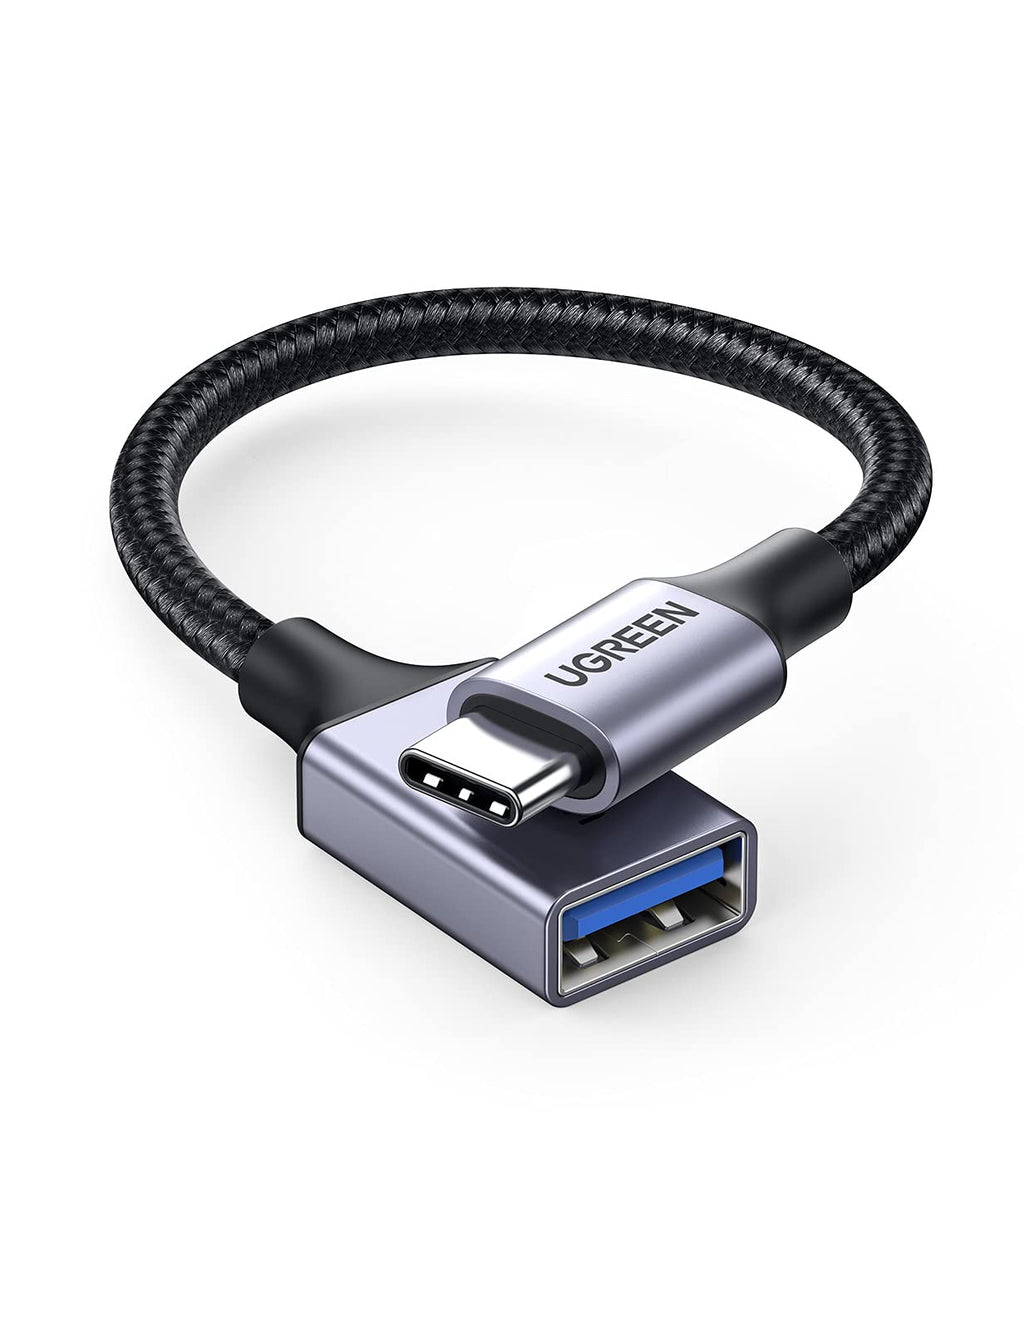  [AUSTRALIA] - UGREEN USB C to USB 3.0 Adapter Type C OTG Cable Thunderbolt 3 to USB Female Adapter OTG Cable Compatible for MacBook Pro 2020/2019/2018 MacBook Air/iPad Pro 2020 Dell XPS Galaxy Note20 Ultra S20